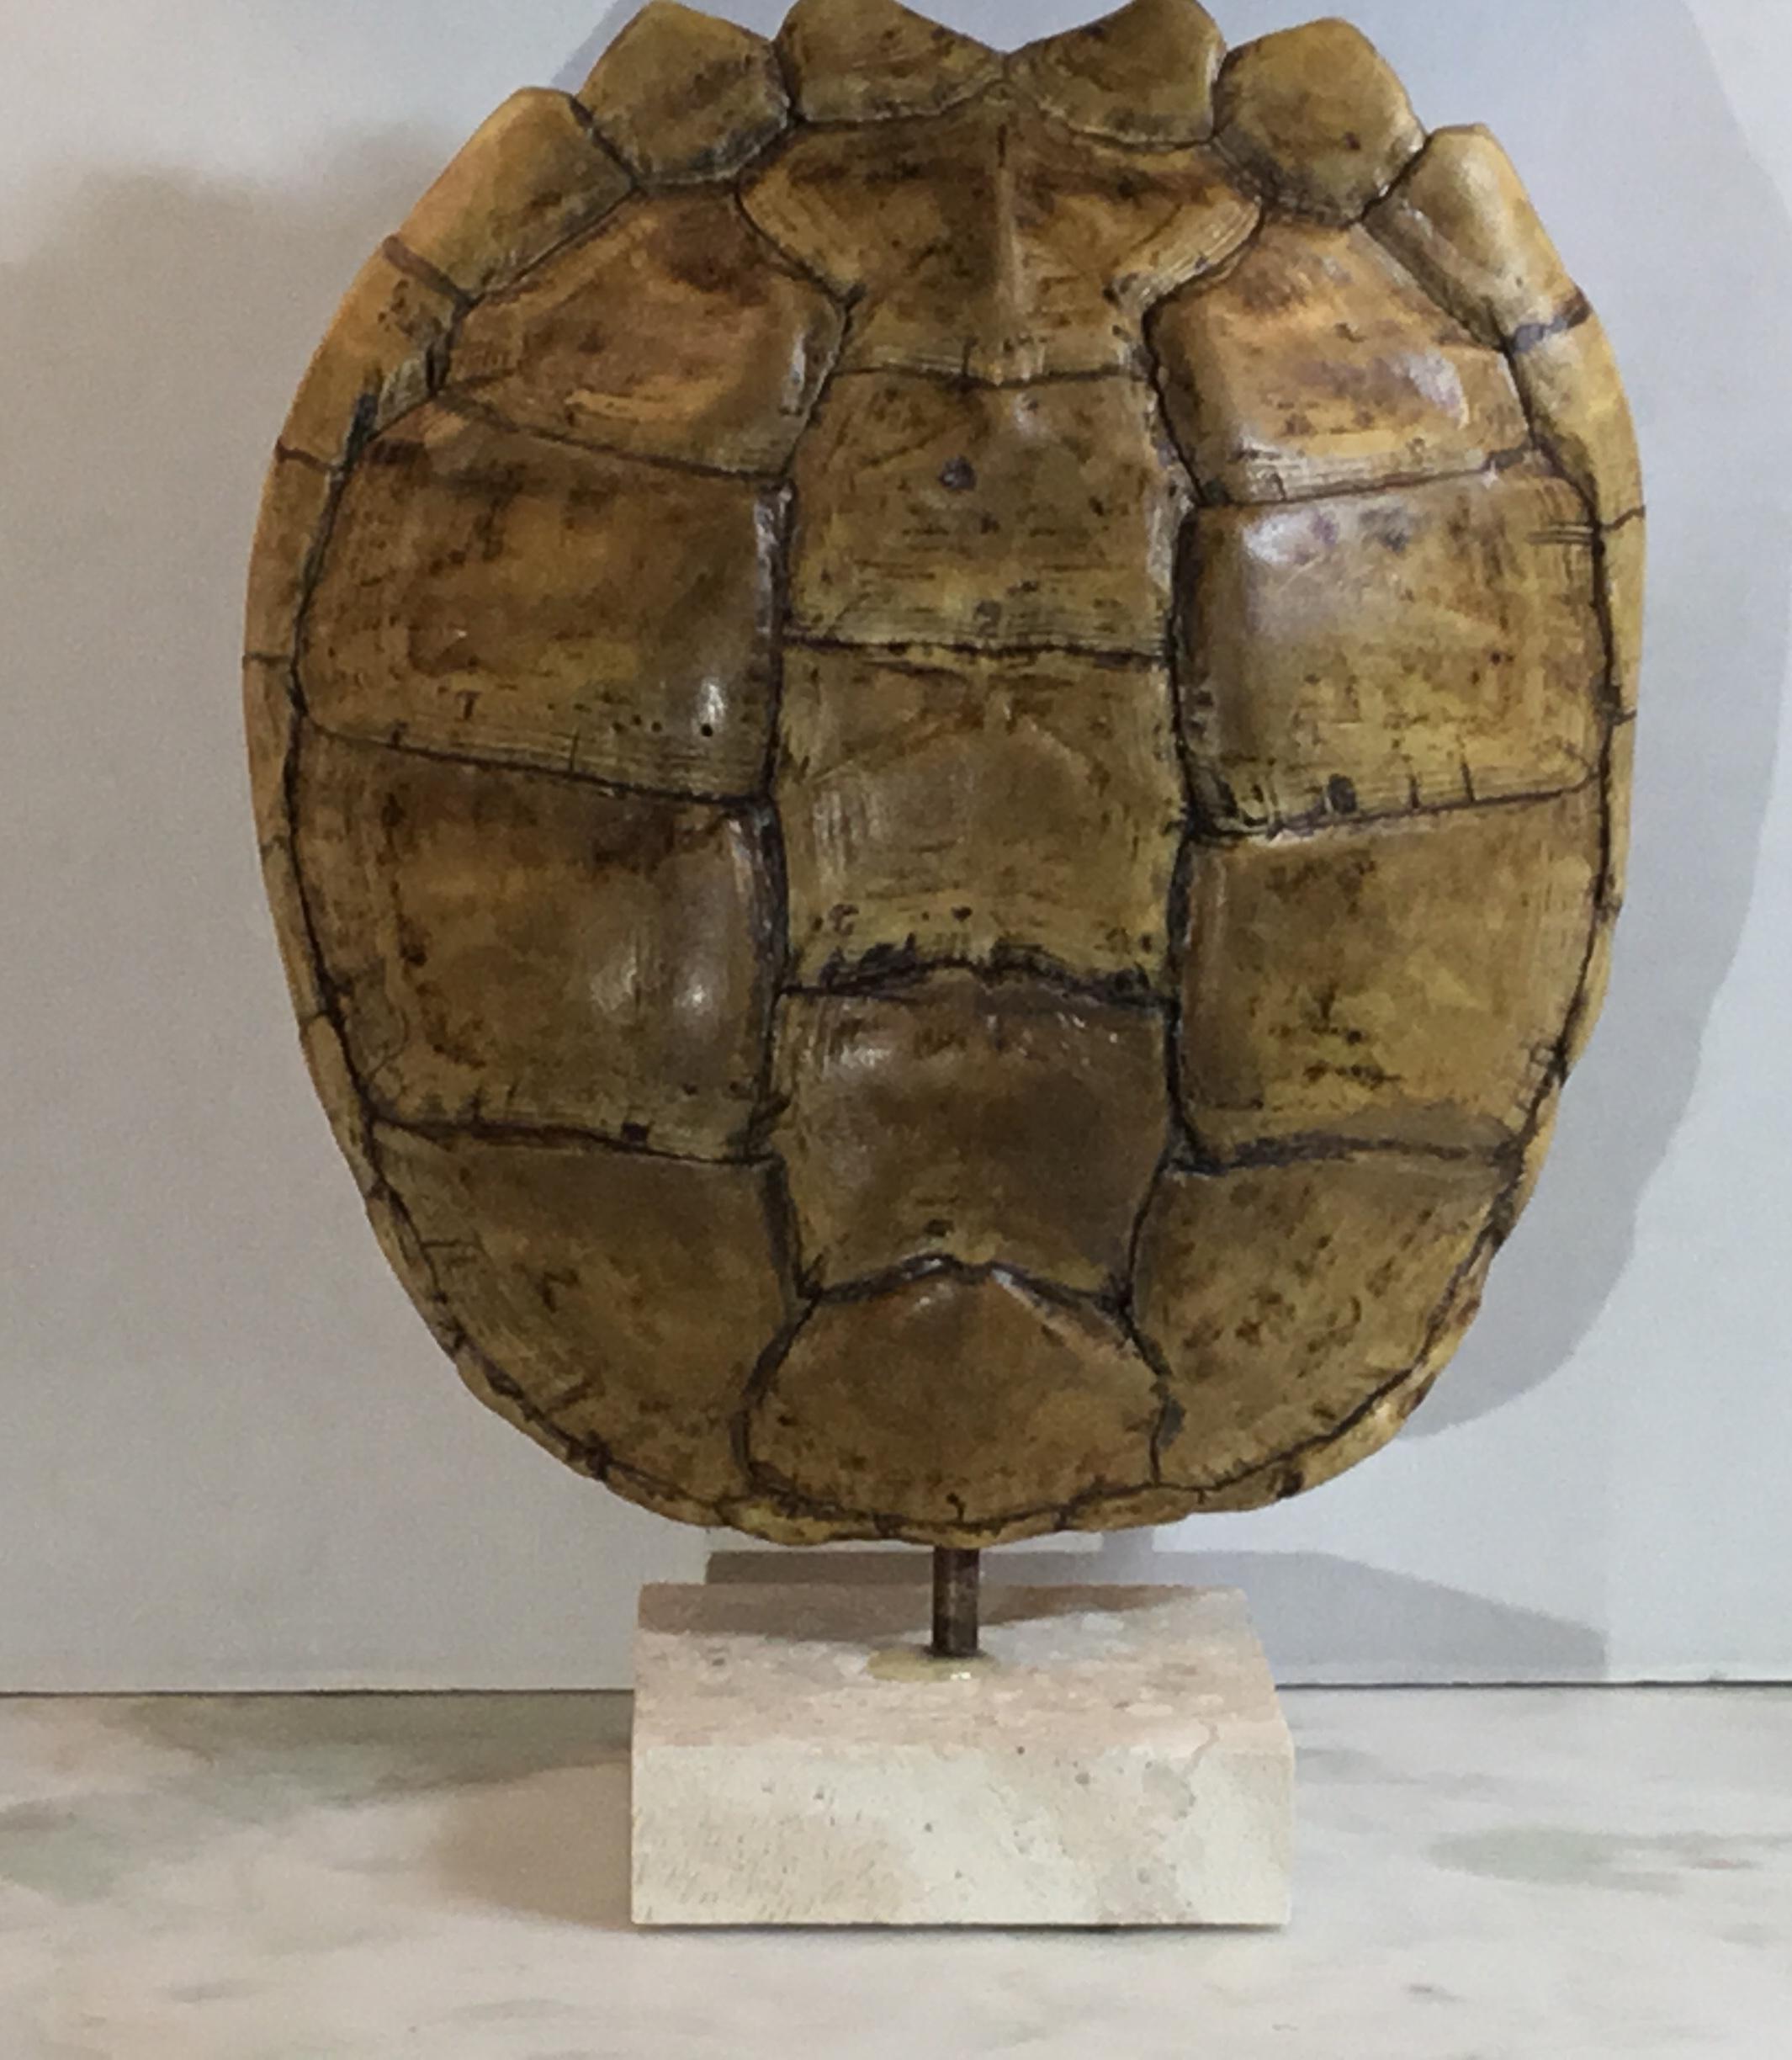 Decorative fresh water turtle shell professionally mounted on coral base, the shell is cleaned and seal with clear protective satin finish.
And the back is upholstered with silk fabric. Beautiful natural piece of art for display.